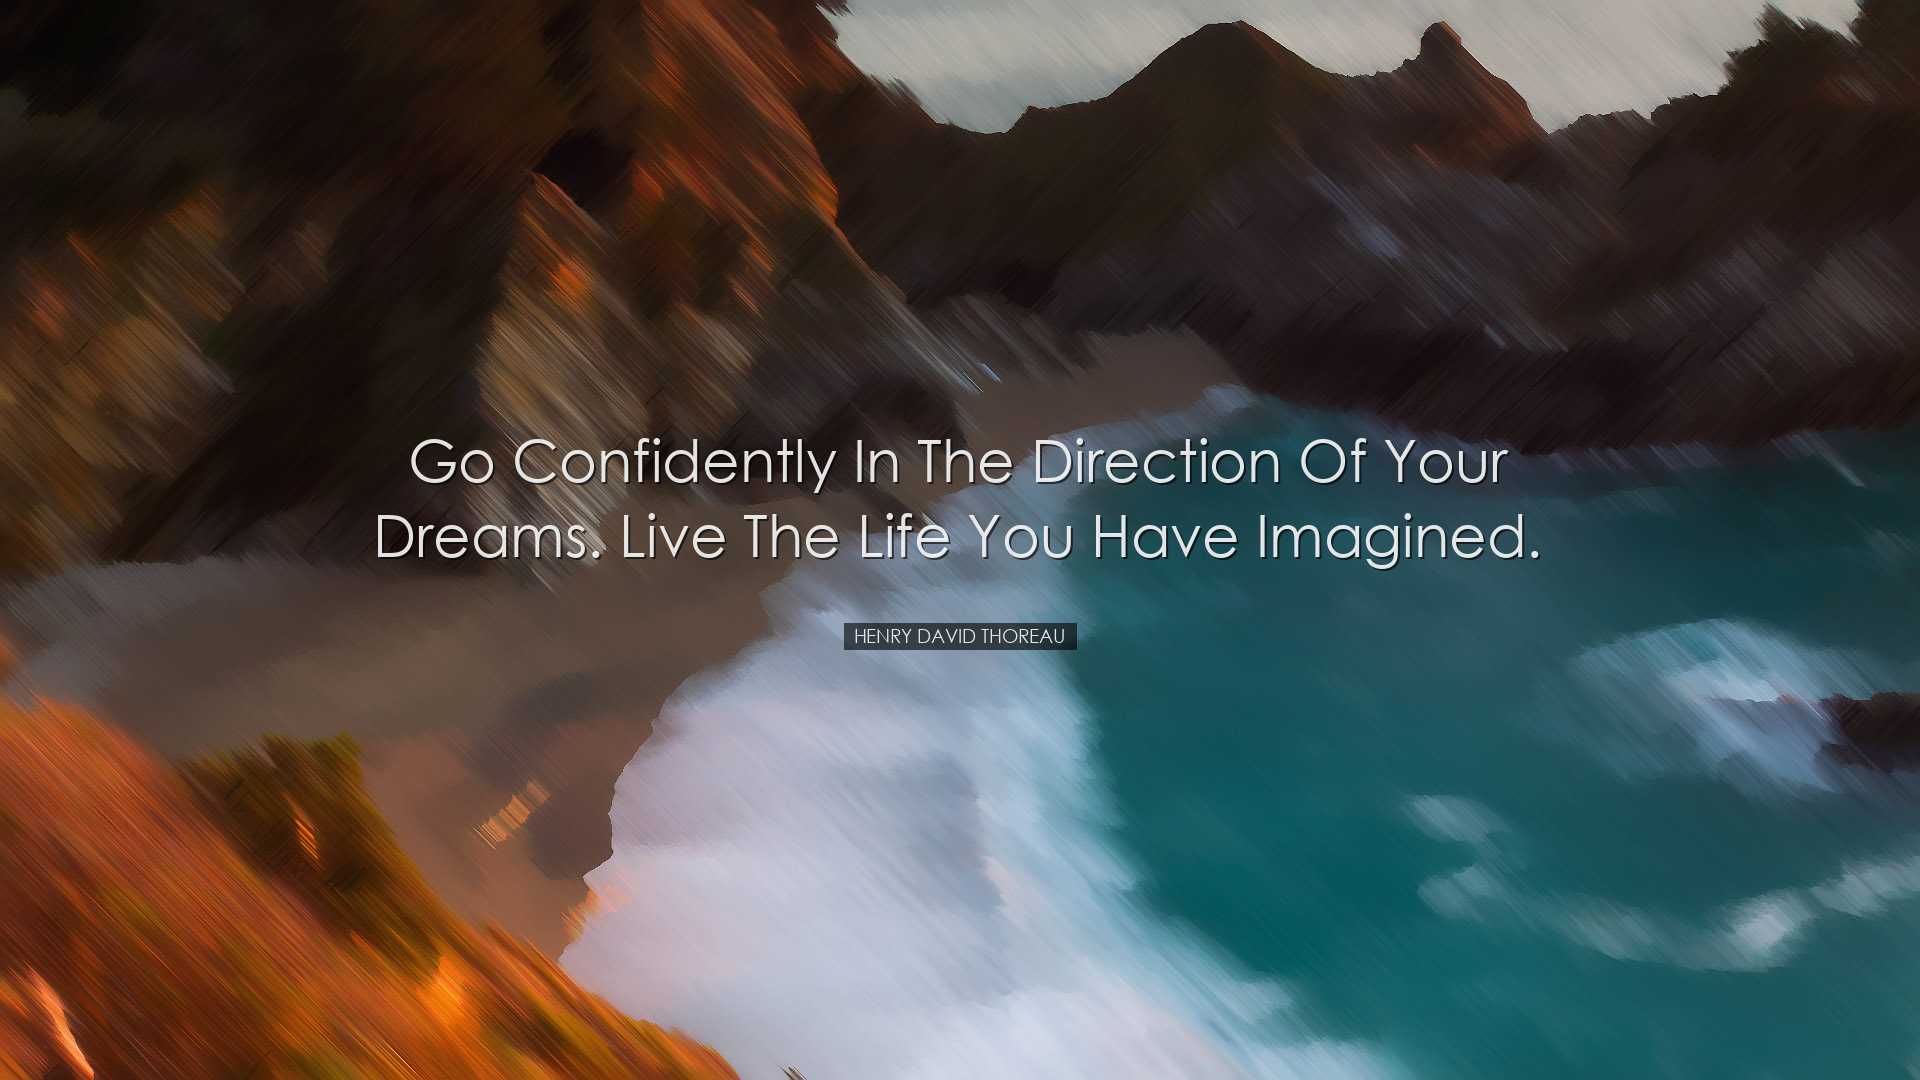 Go confidently in the direction of your dreams. Live the life you